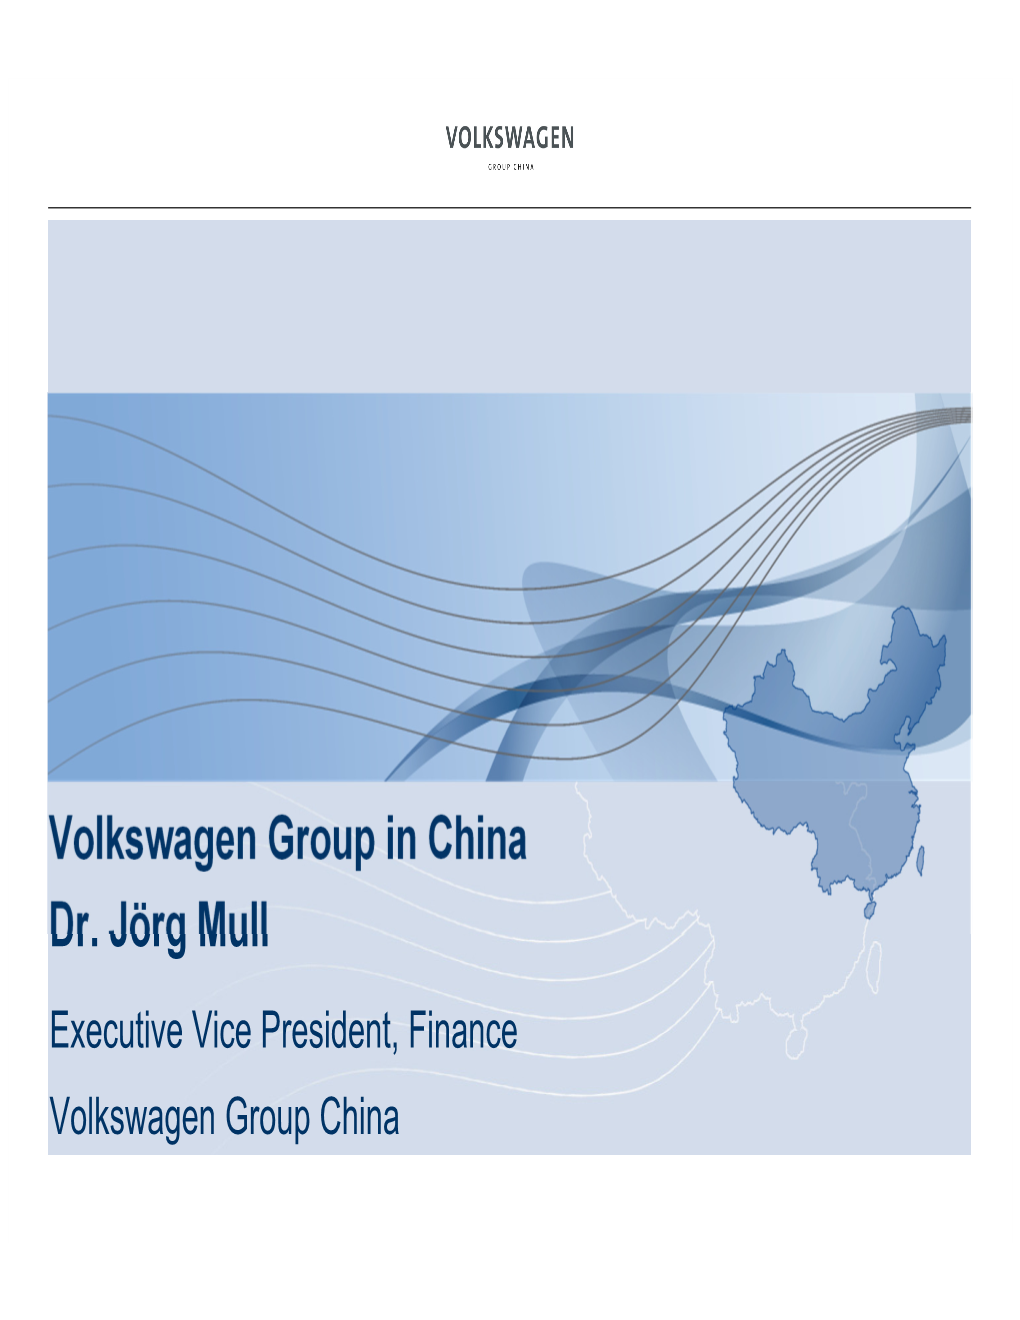 Volkswagen Group in China Dr. Jörg Mull Executive Vice President, Finance Volkswagen Group China Volkswagen Group in China